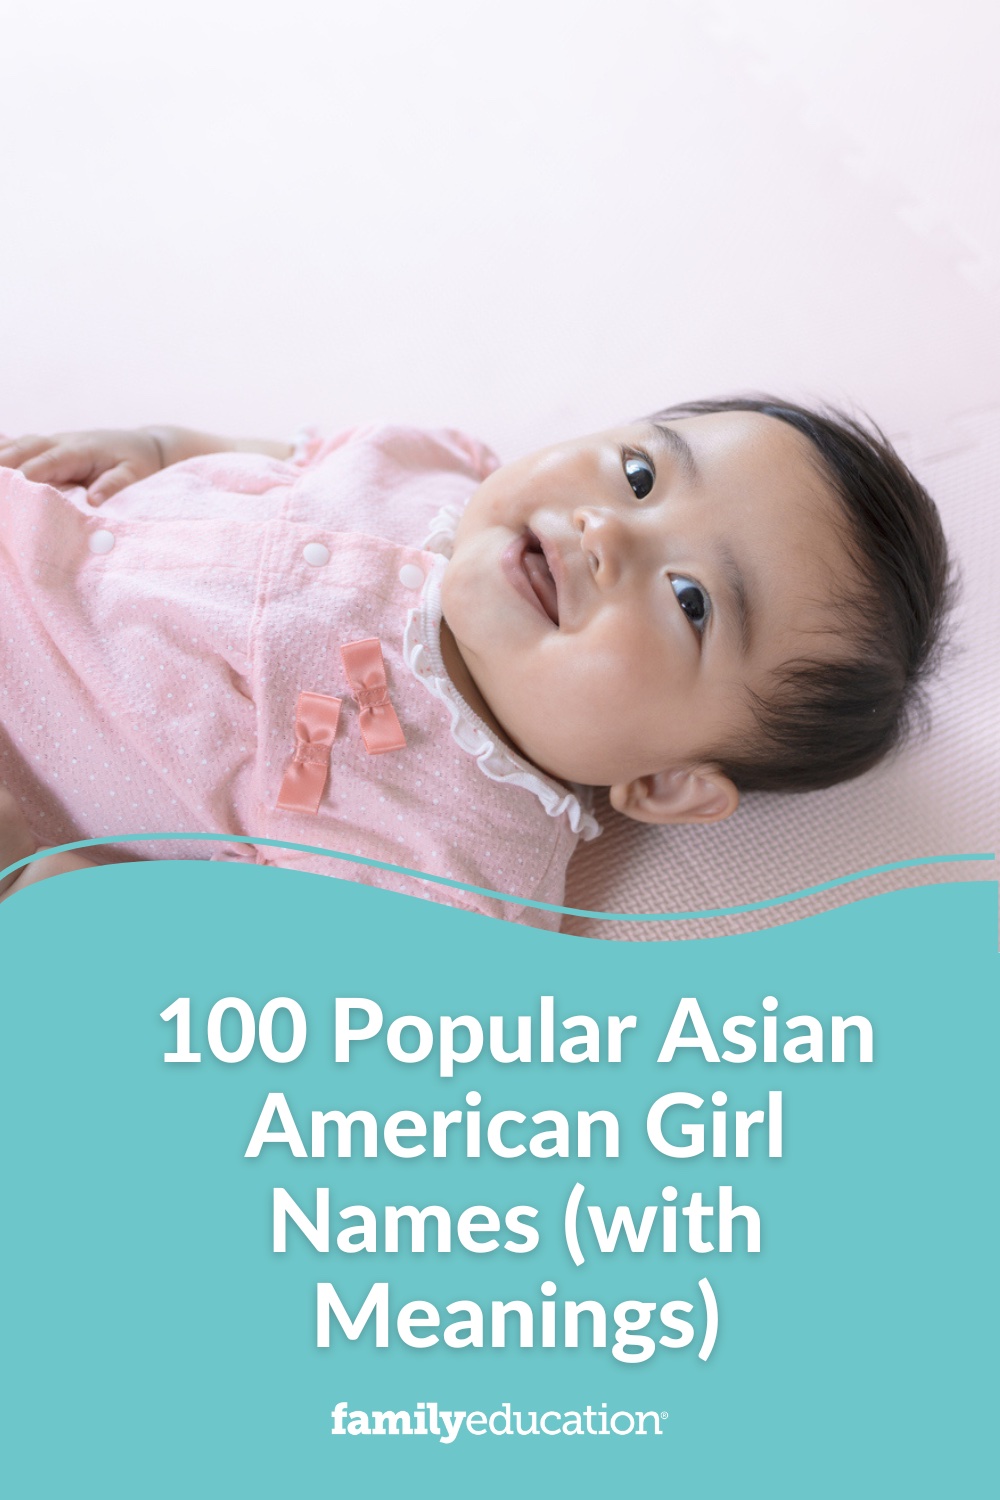 100 Popular Asian American Girl Names (with Meanings)